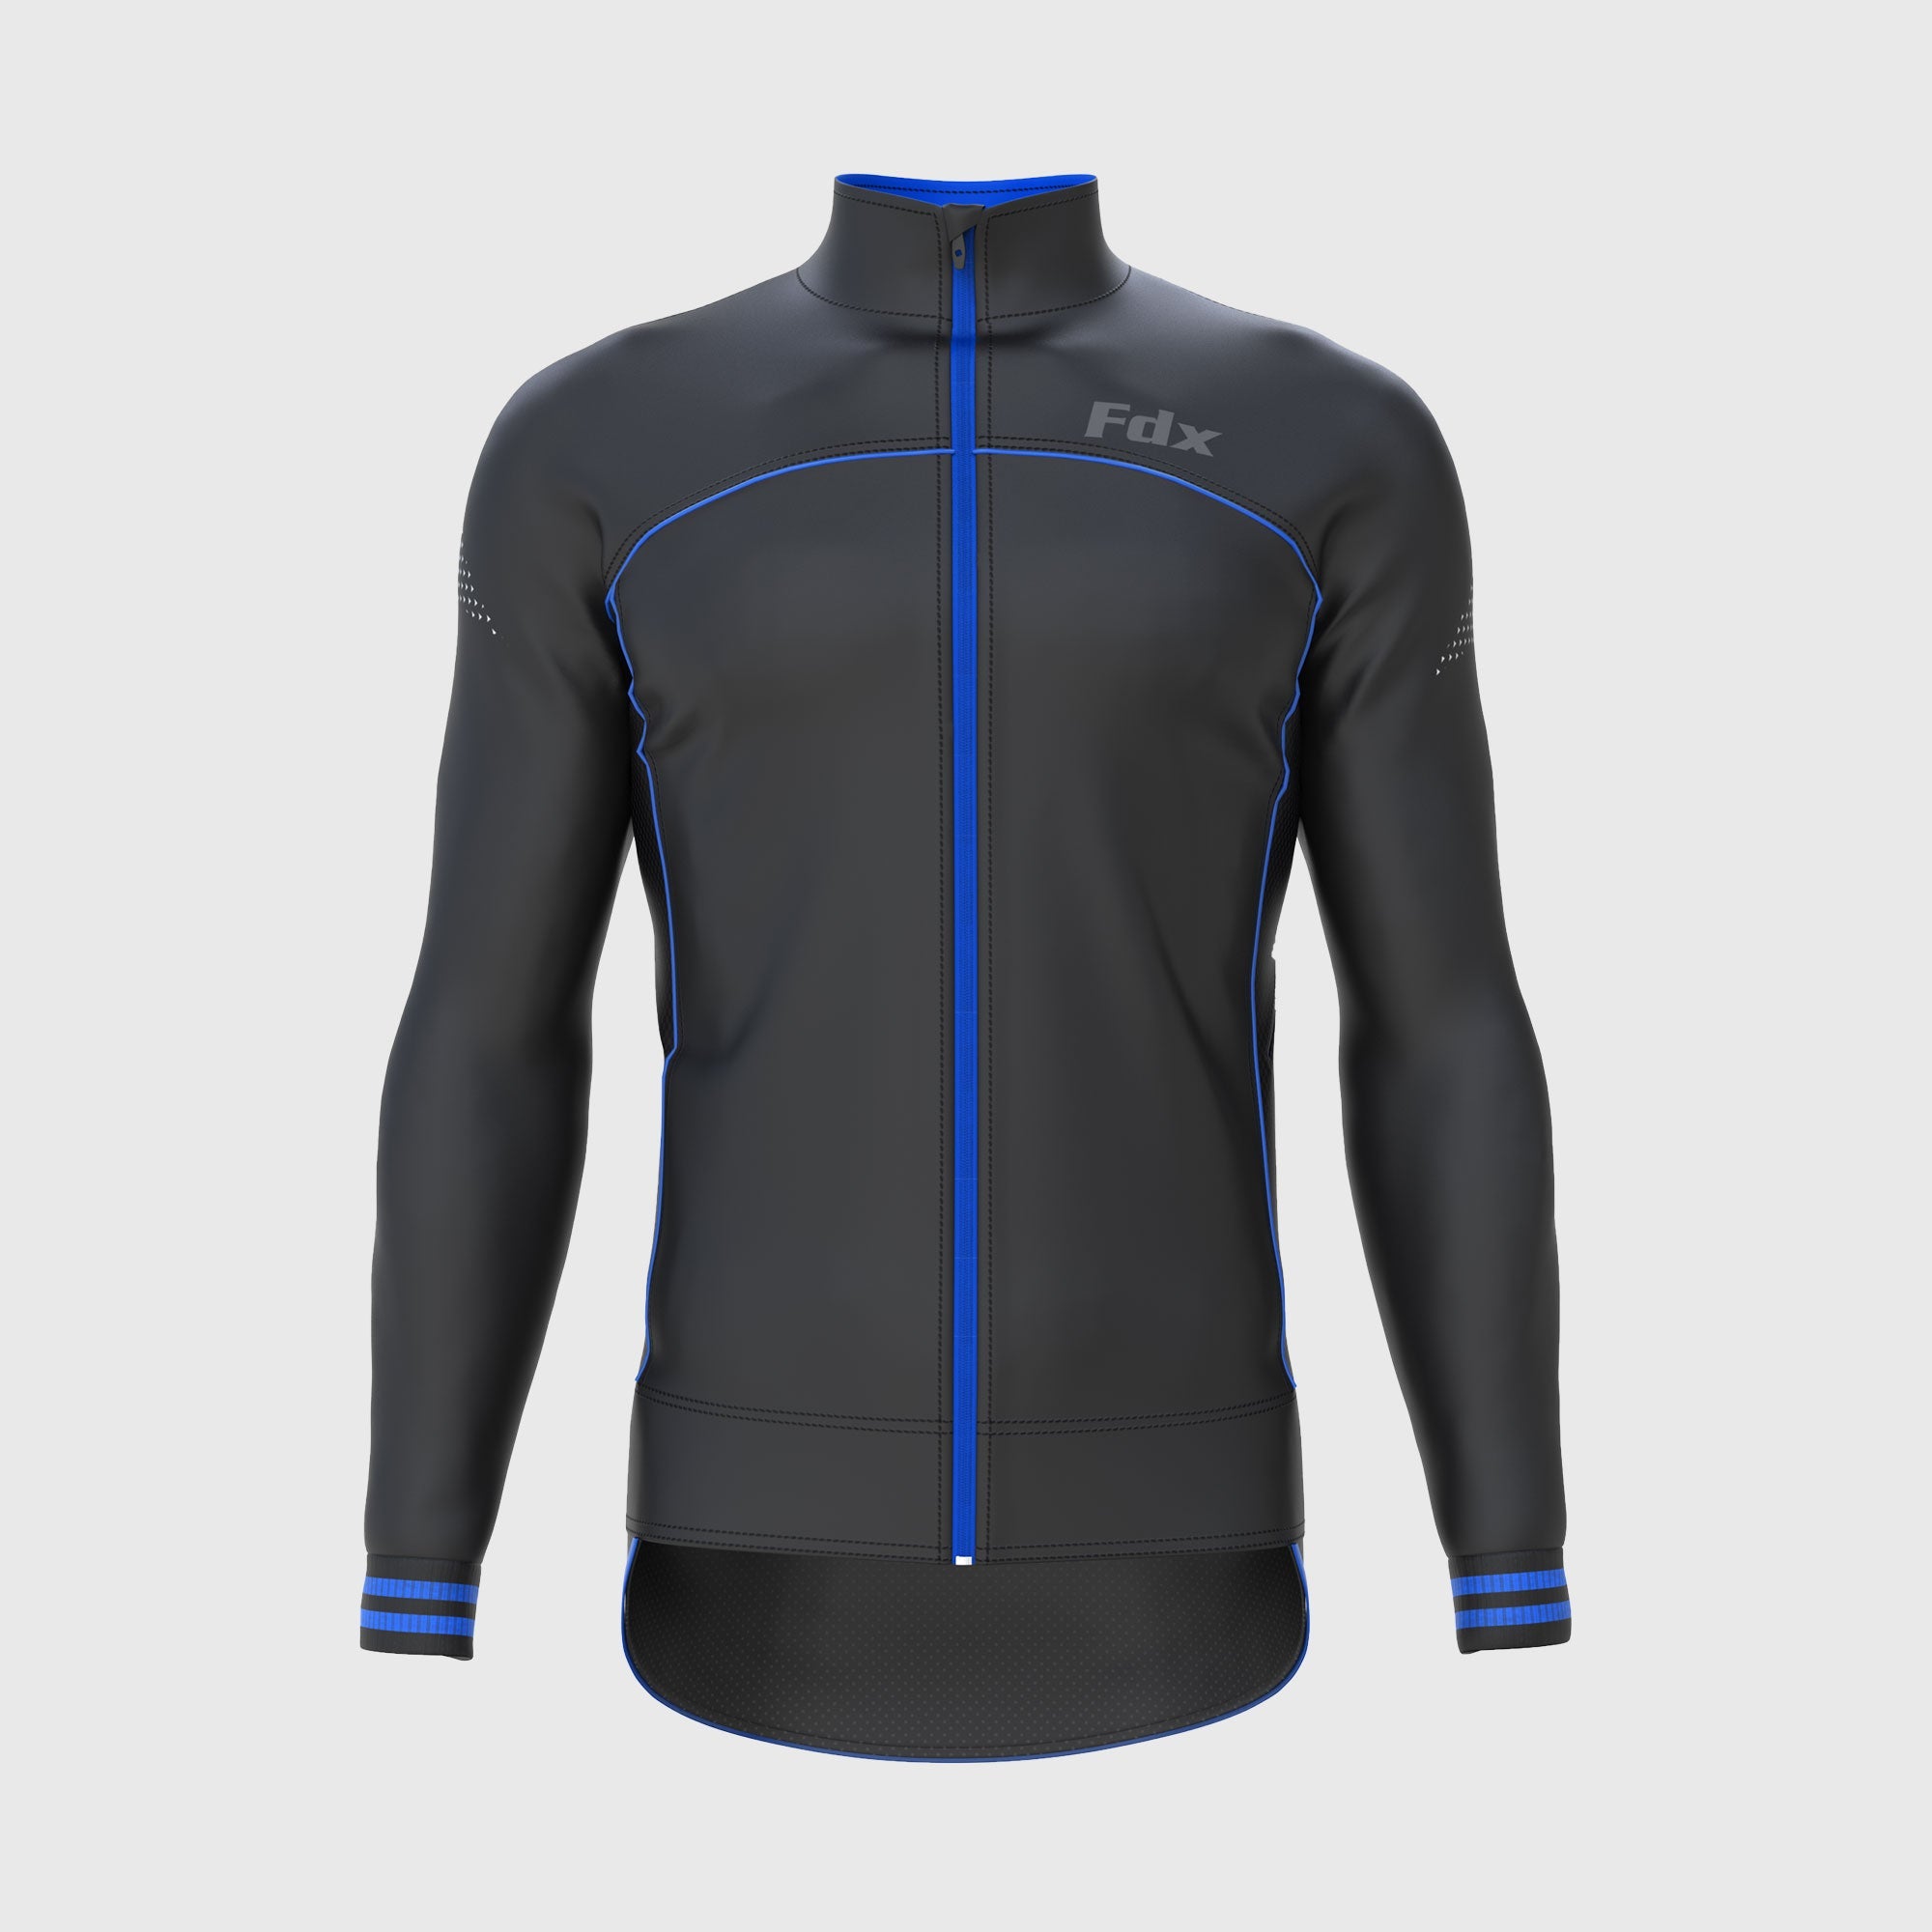 Fdx Apollux Blue Men's Windproof Cycling Jacket